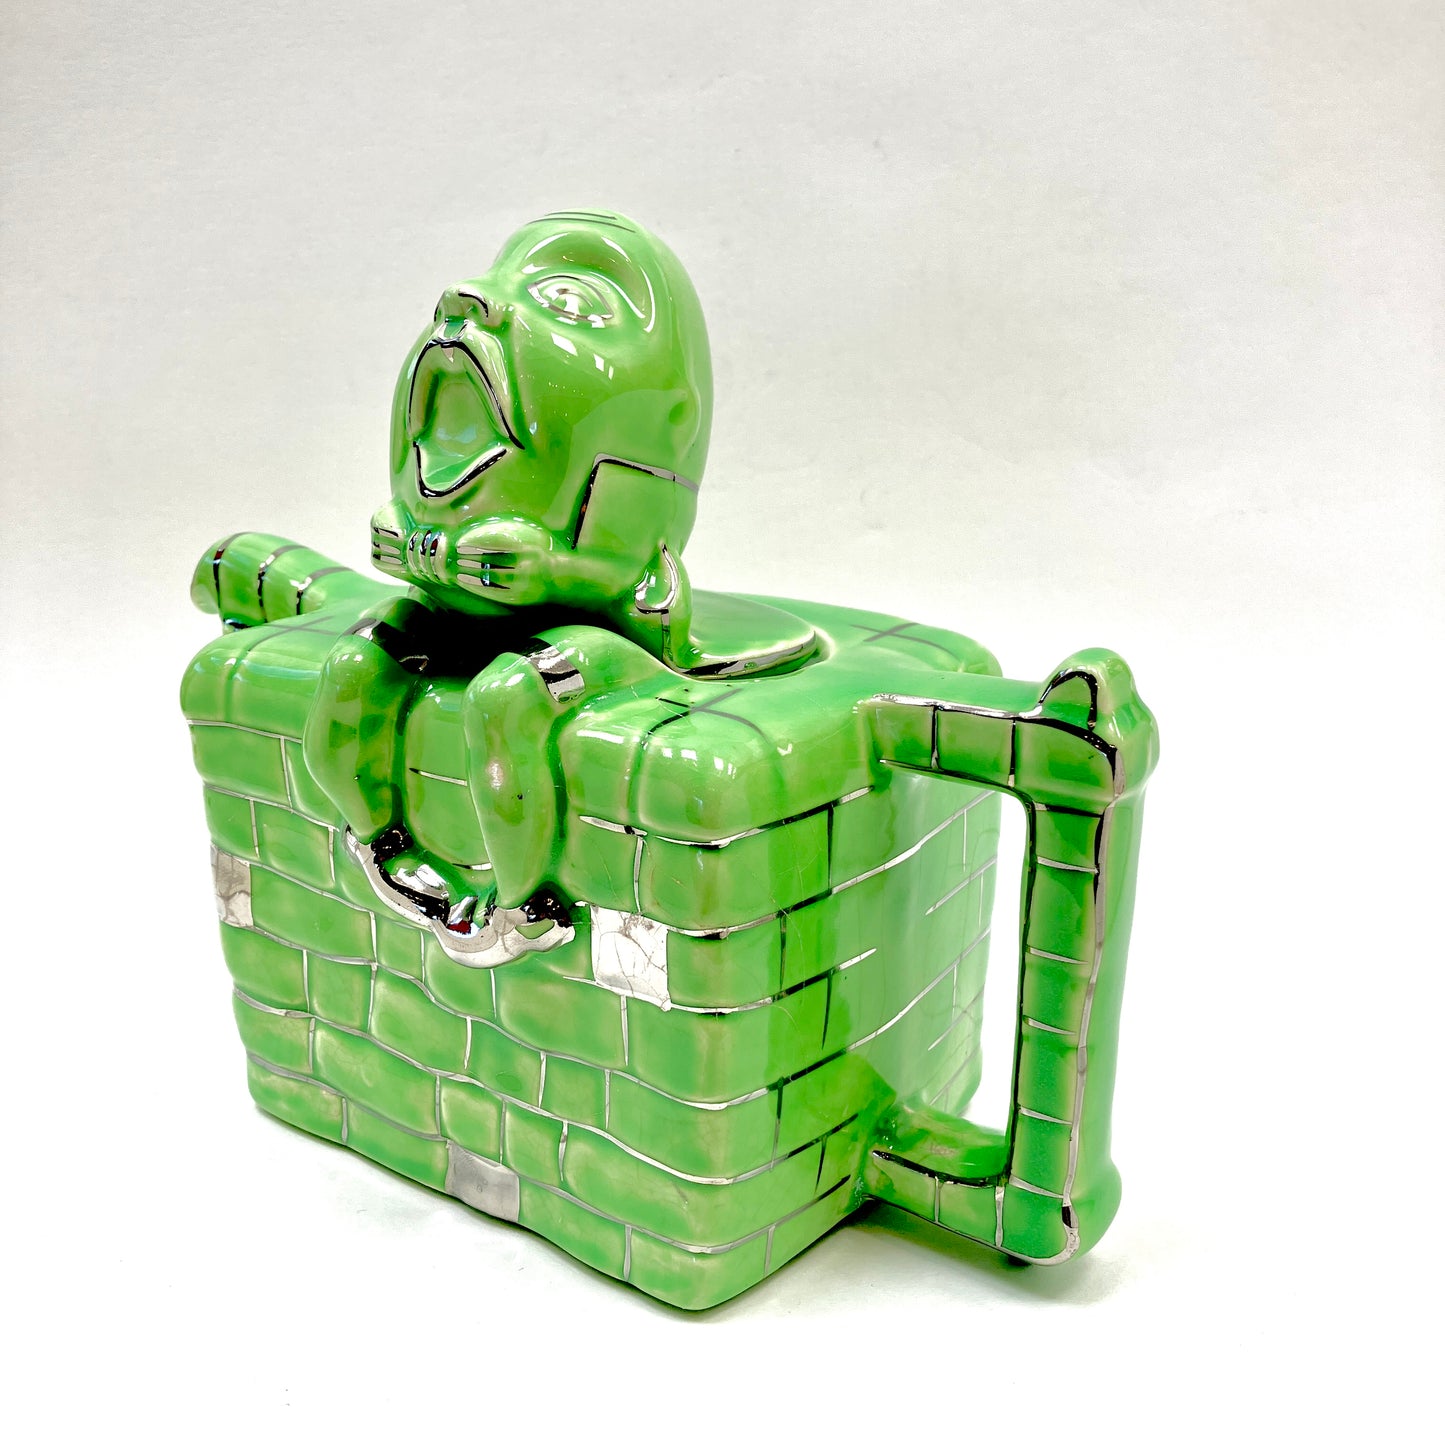 Lingard, Teapot, Figural, Humpty Dumpty, Vintage, Lime Green, Silver Trimmed, England, 830, 10L